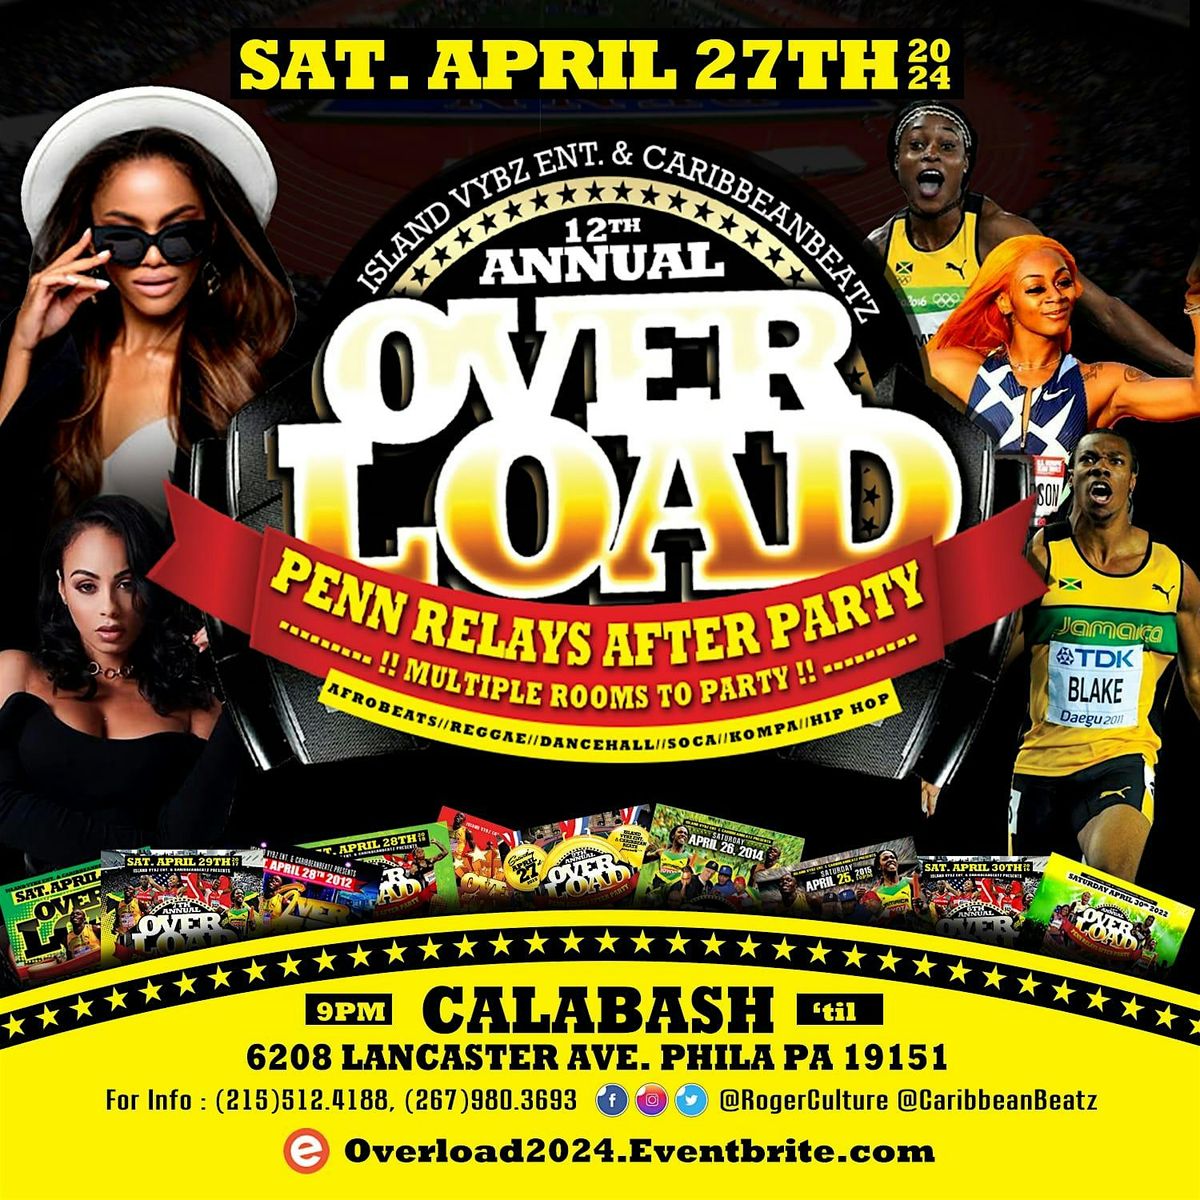 OverLoad2024 PENN RELAYS AFTER PARTY!